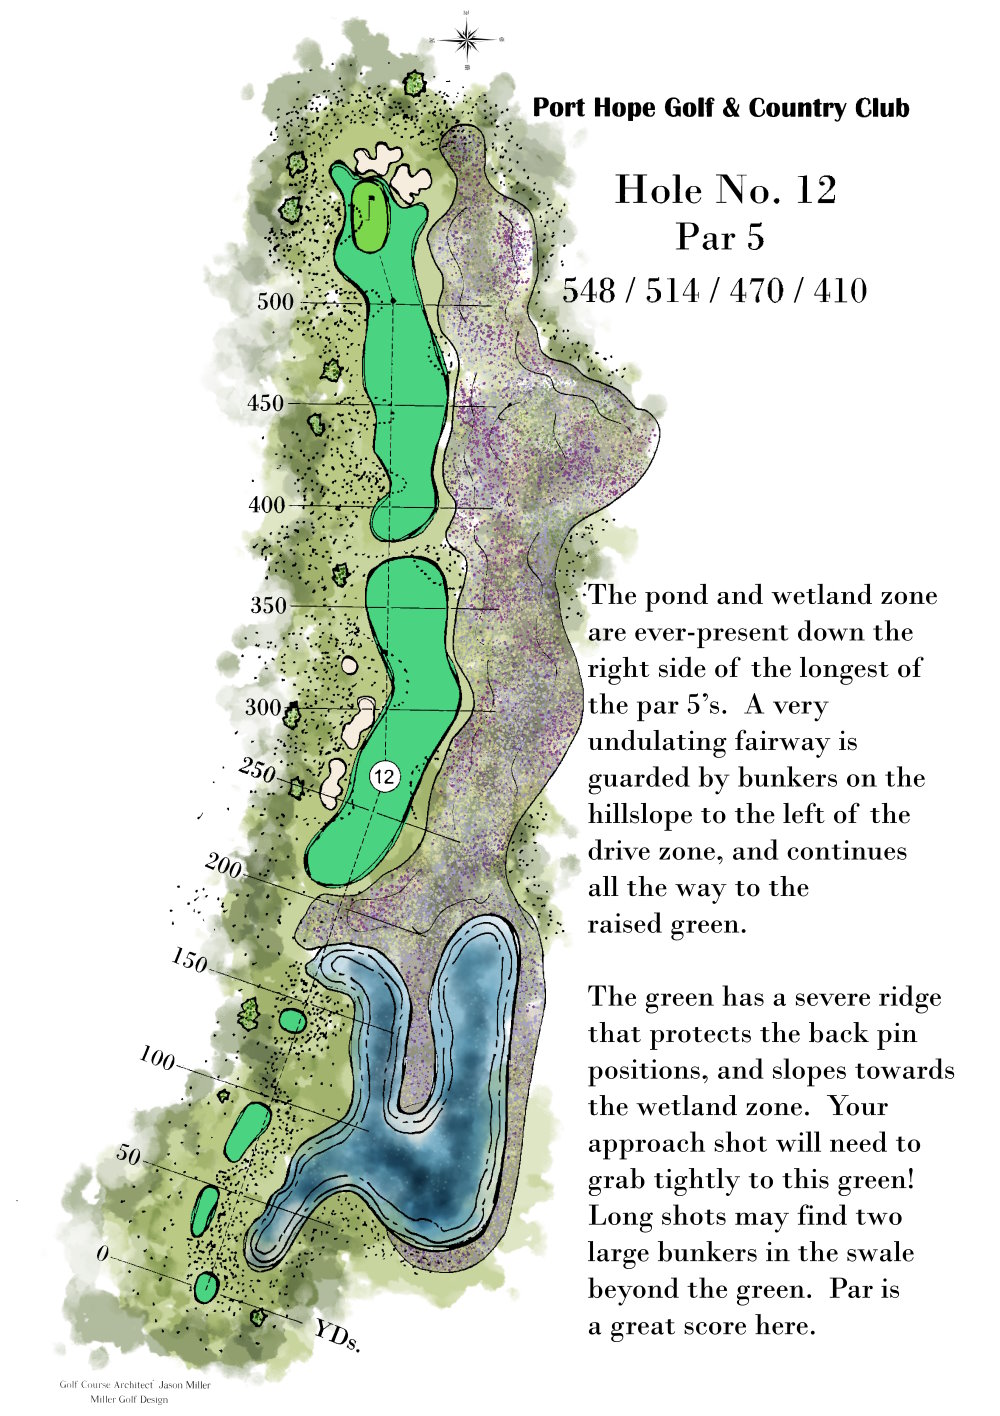 Rendering of Hole 12